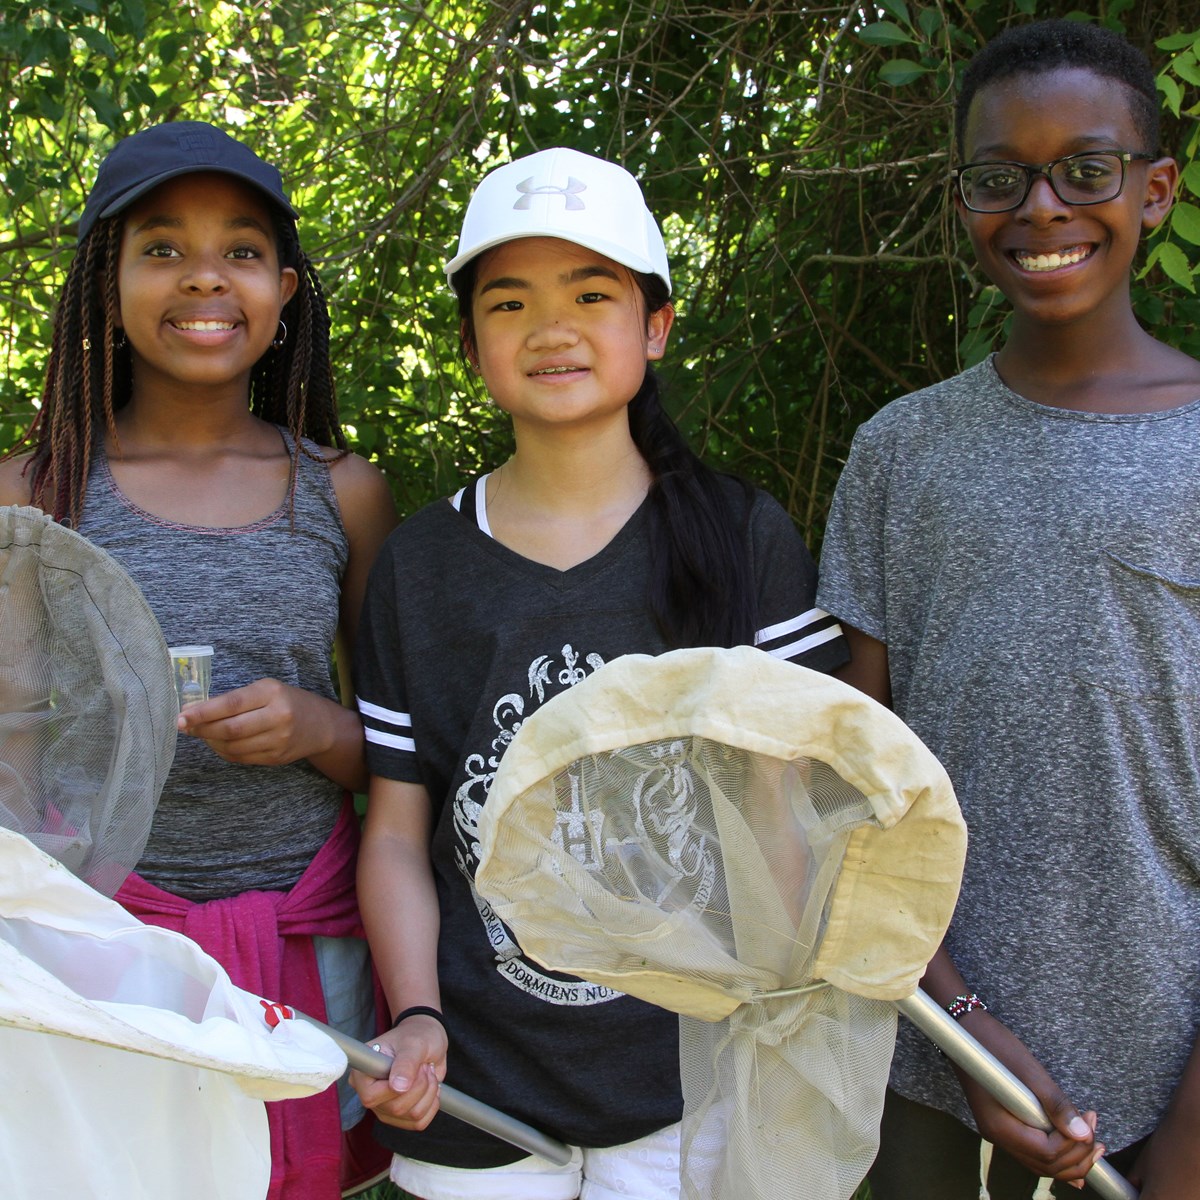 School-age kids holding nets on a field trip with the Tsongas Industrial History Center